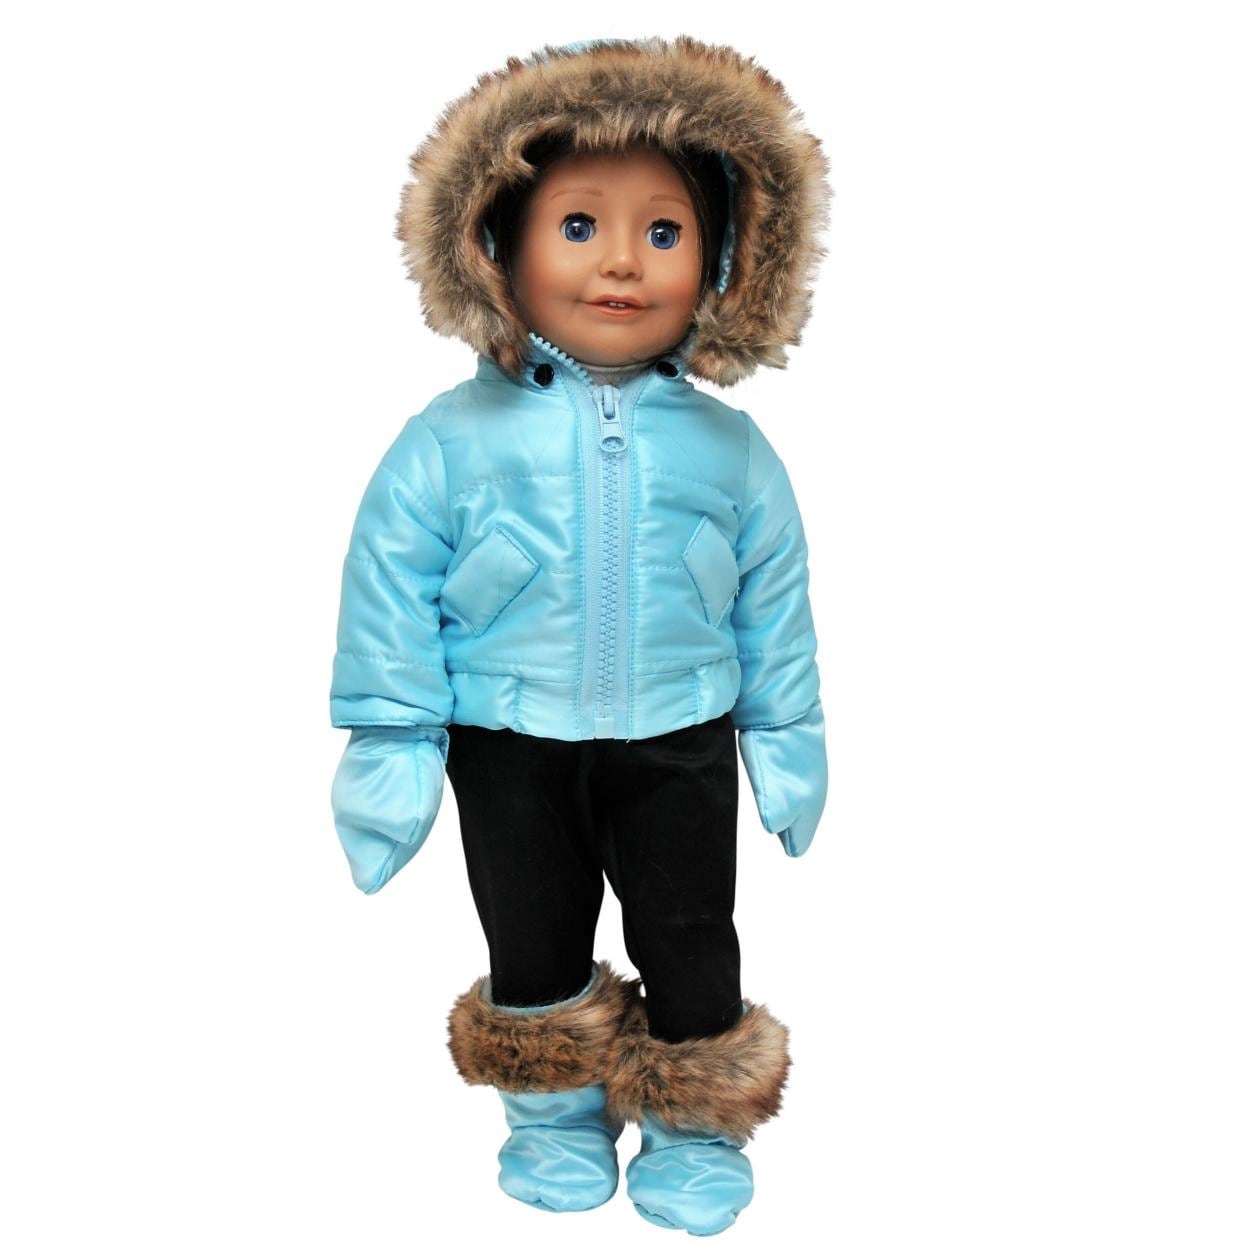 clothes that fit american girl dolls